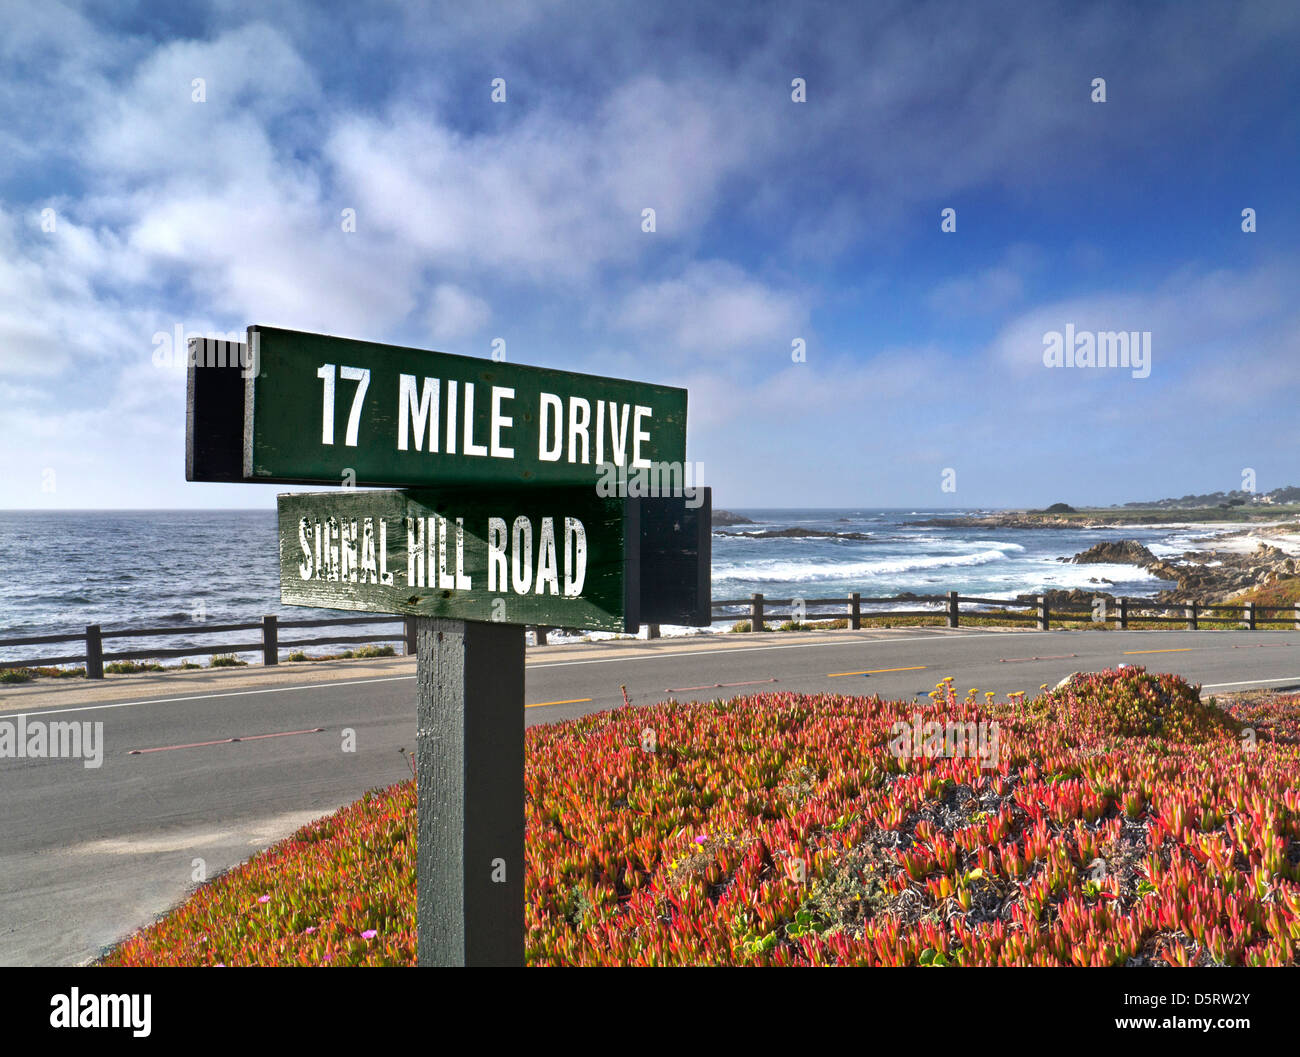 17 mile drive Pebble Beach sign in a fabulous scenic Pacific route through Pacific Grove and Pebble Beach on the Monterey Peninsula California USA Stock Photo